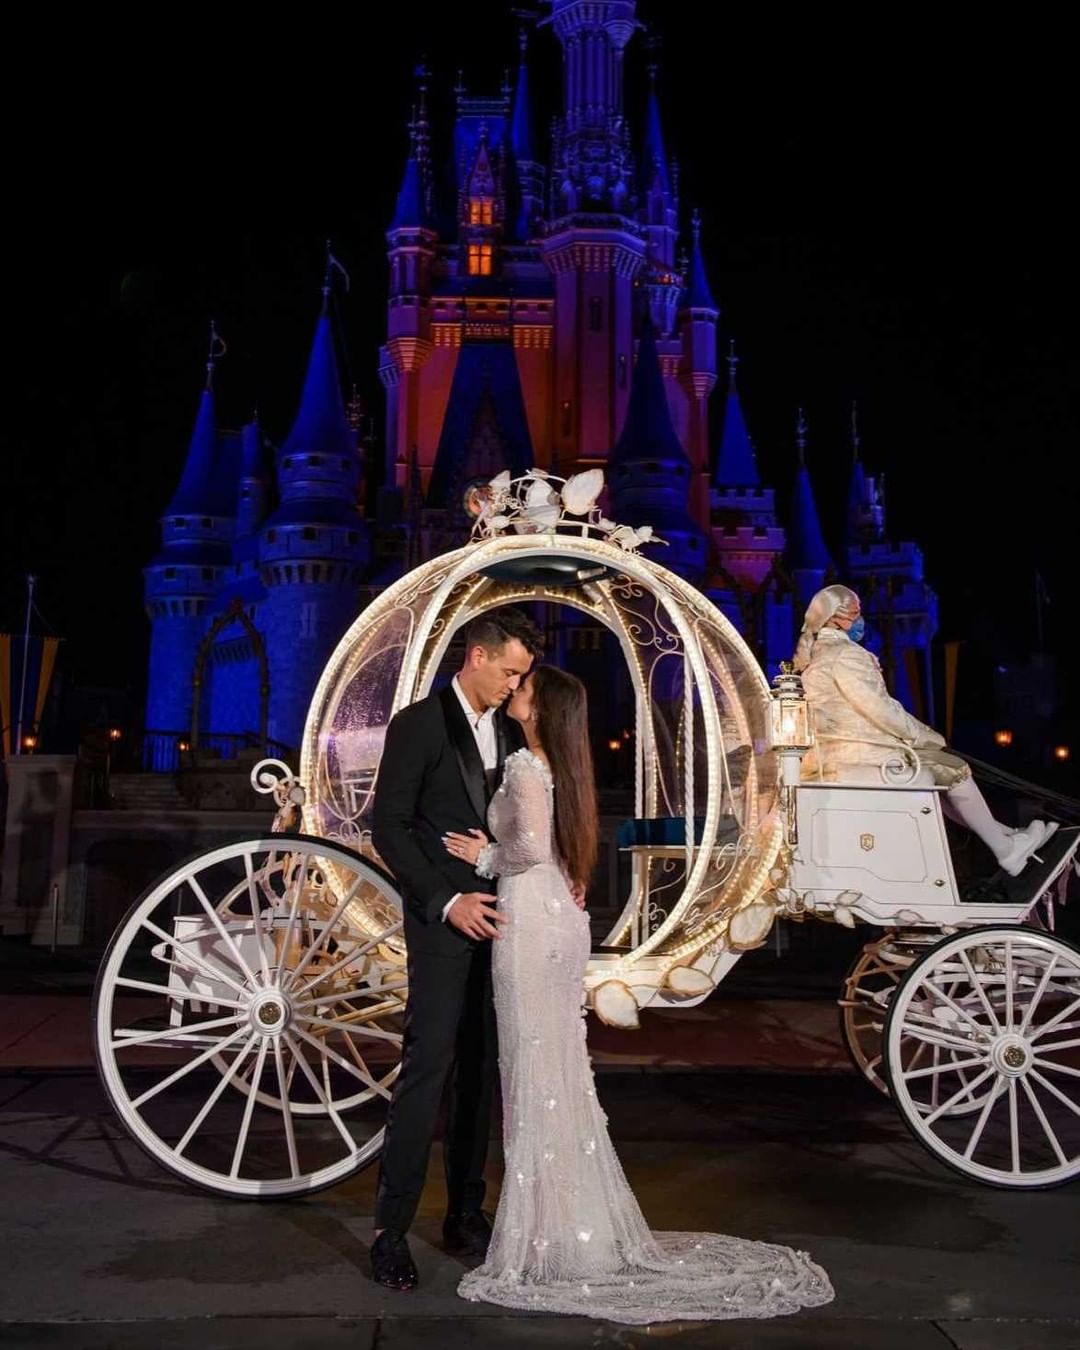 Cinderella's castle and a carriage to complete the Disney wedding theme. 